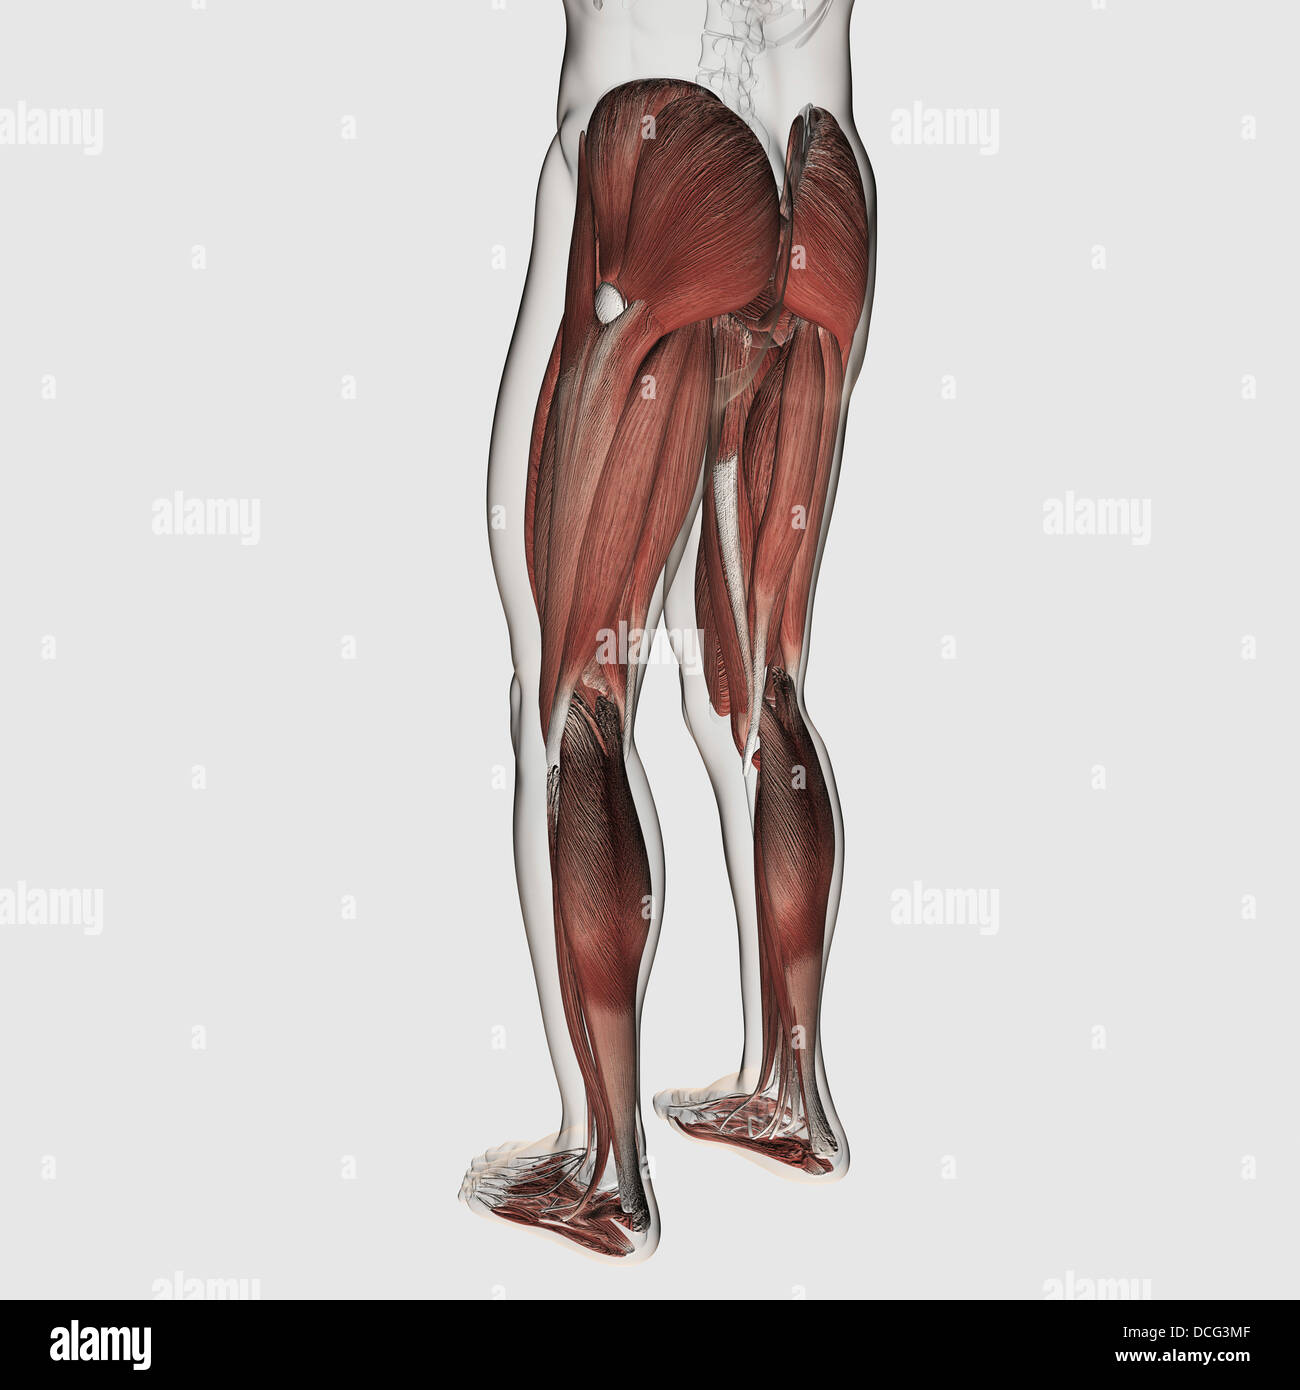 Male muscle anatomy of the human legs, posterior view. Stock Photo